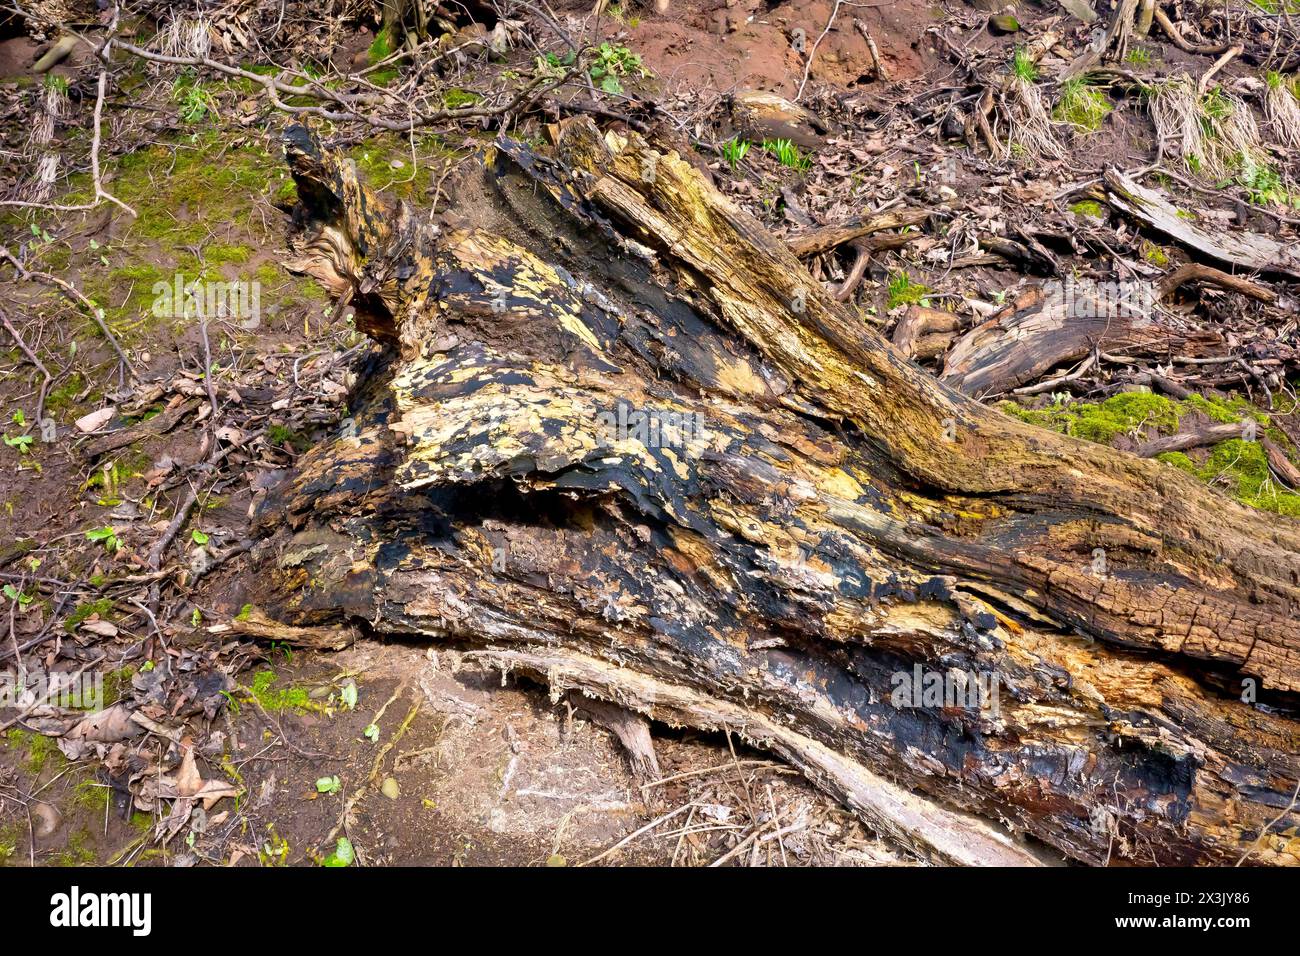 Close up showing a large fallen tree trunk left to rot in place on a woodland floor, the natural process eating away at the wood. Stock Photo